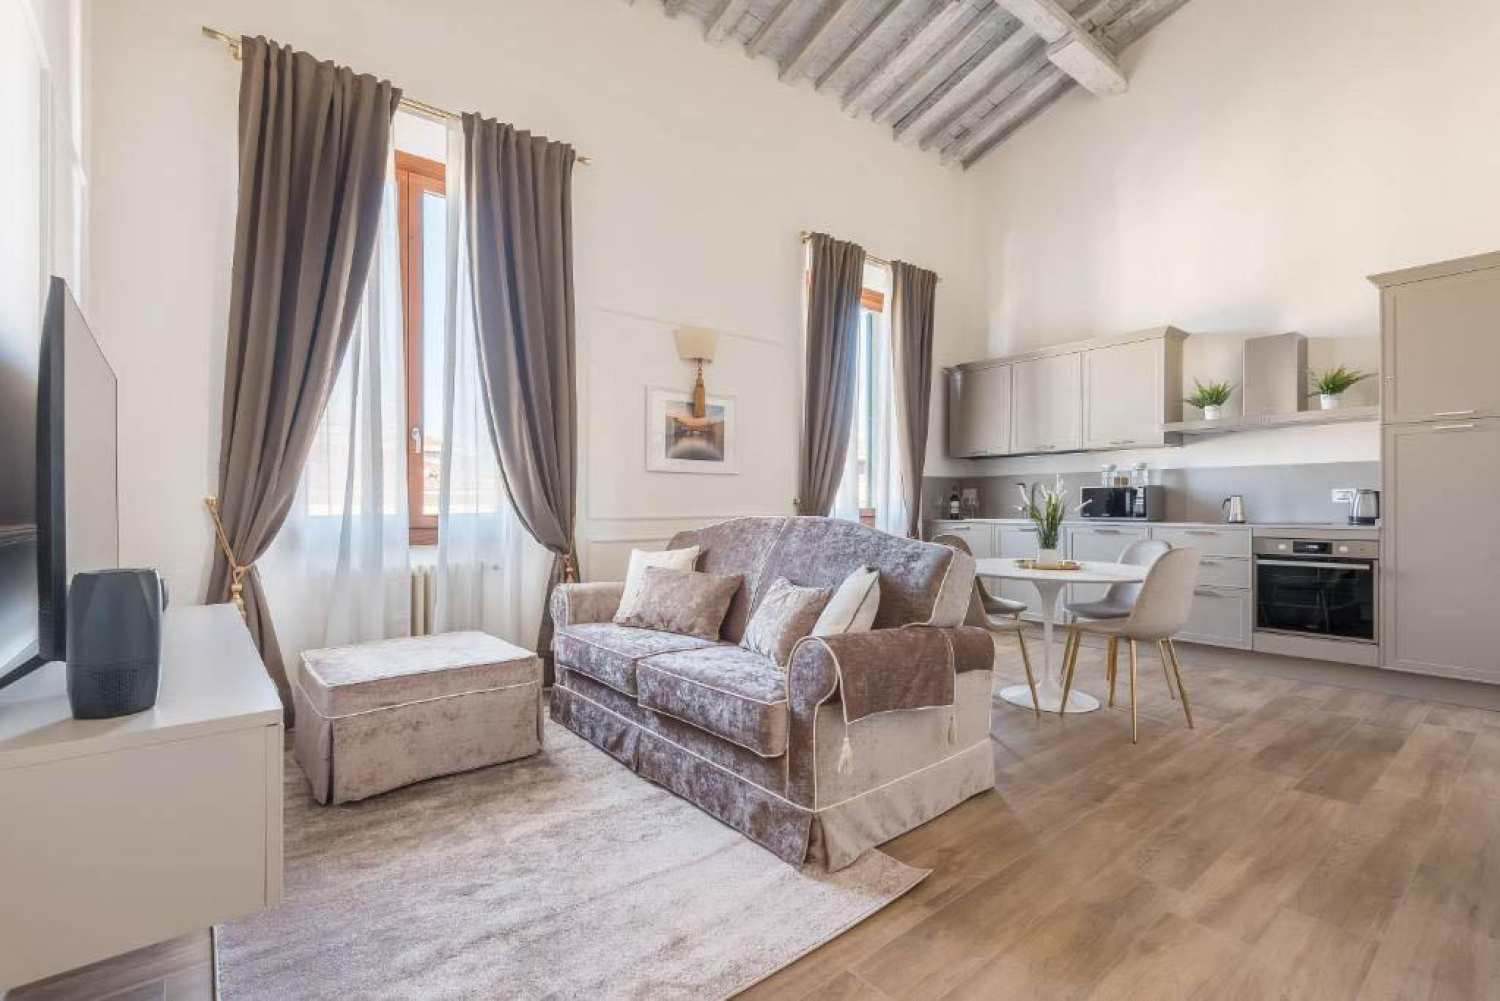 FLORENCE FEEL APARTMENTS A FIRENZE - IBFOR - Your design shop